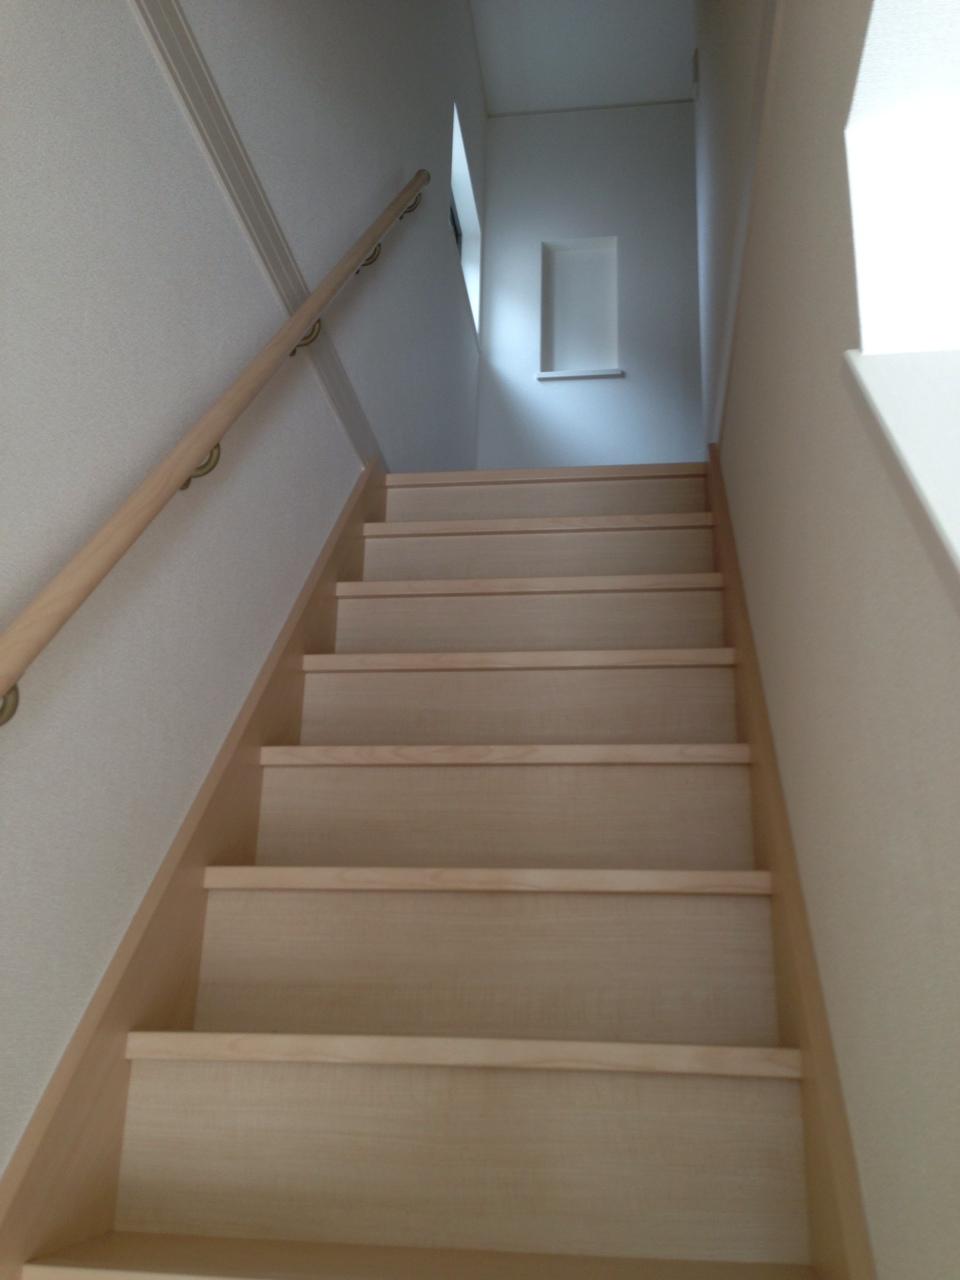 Same specifications photos (Other introspection). Stairs Example of construction